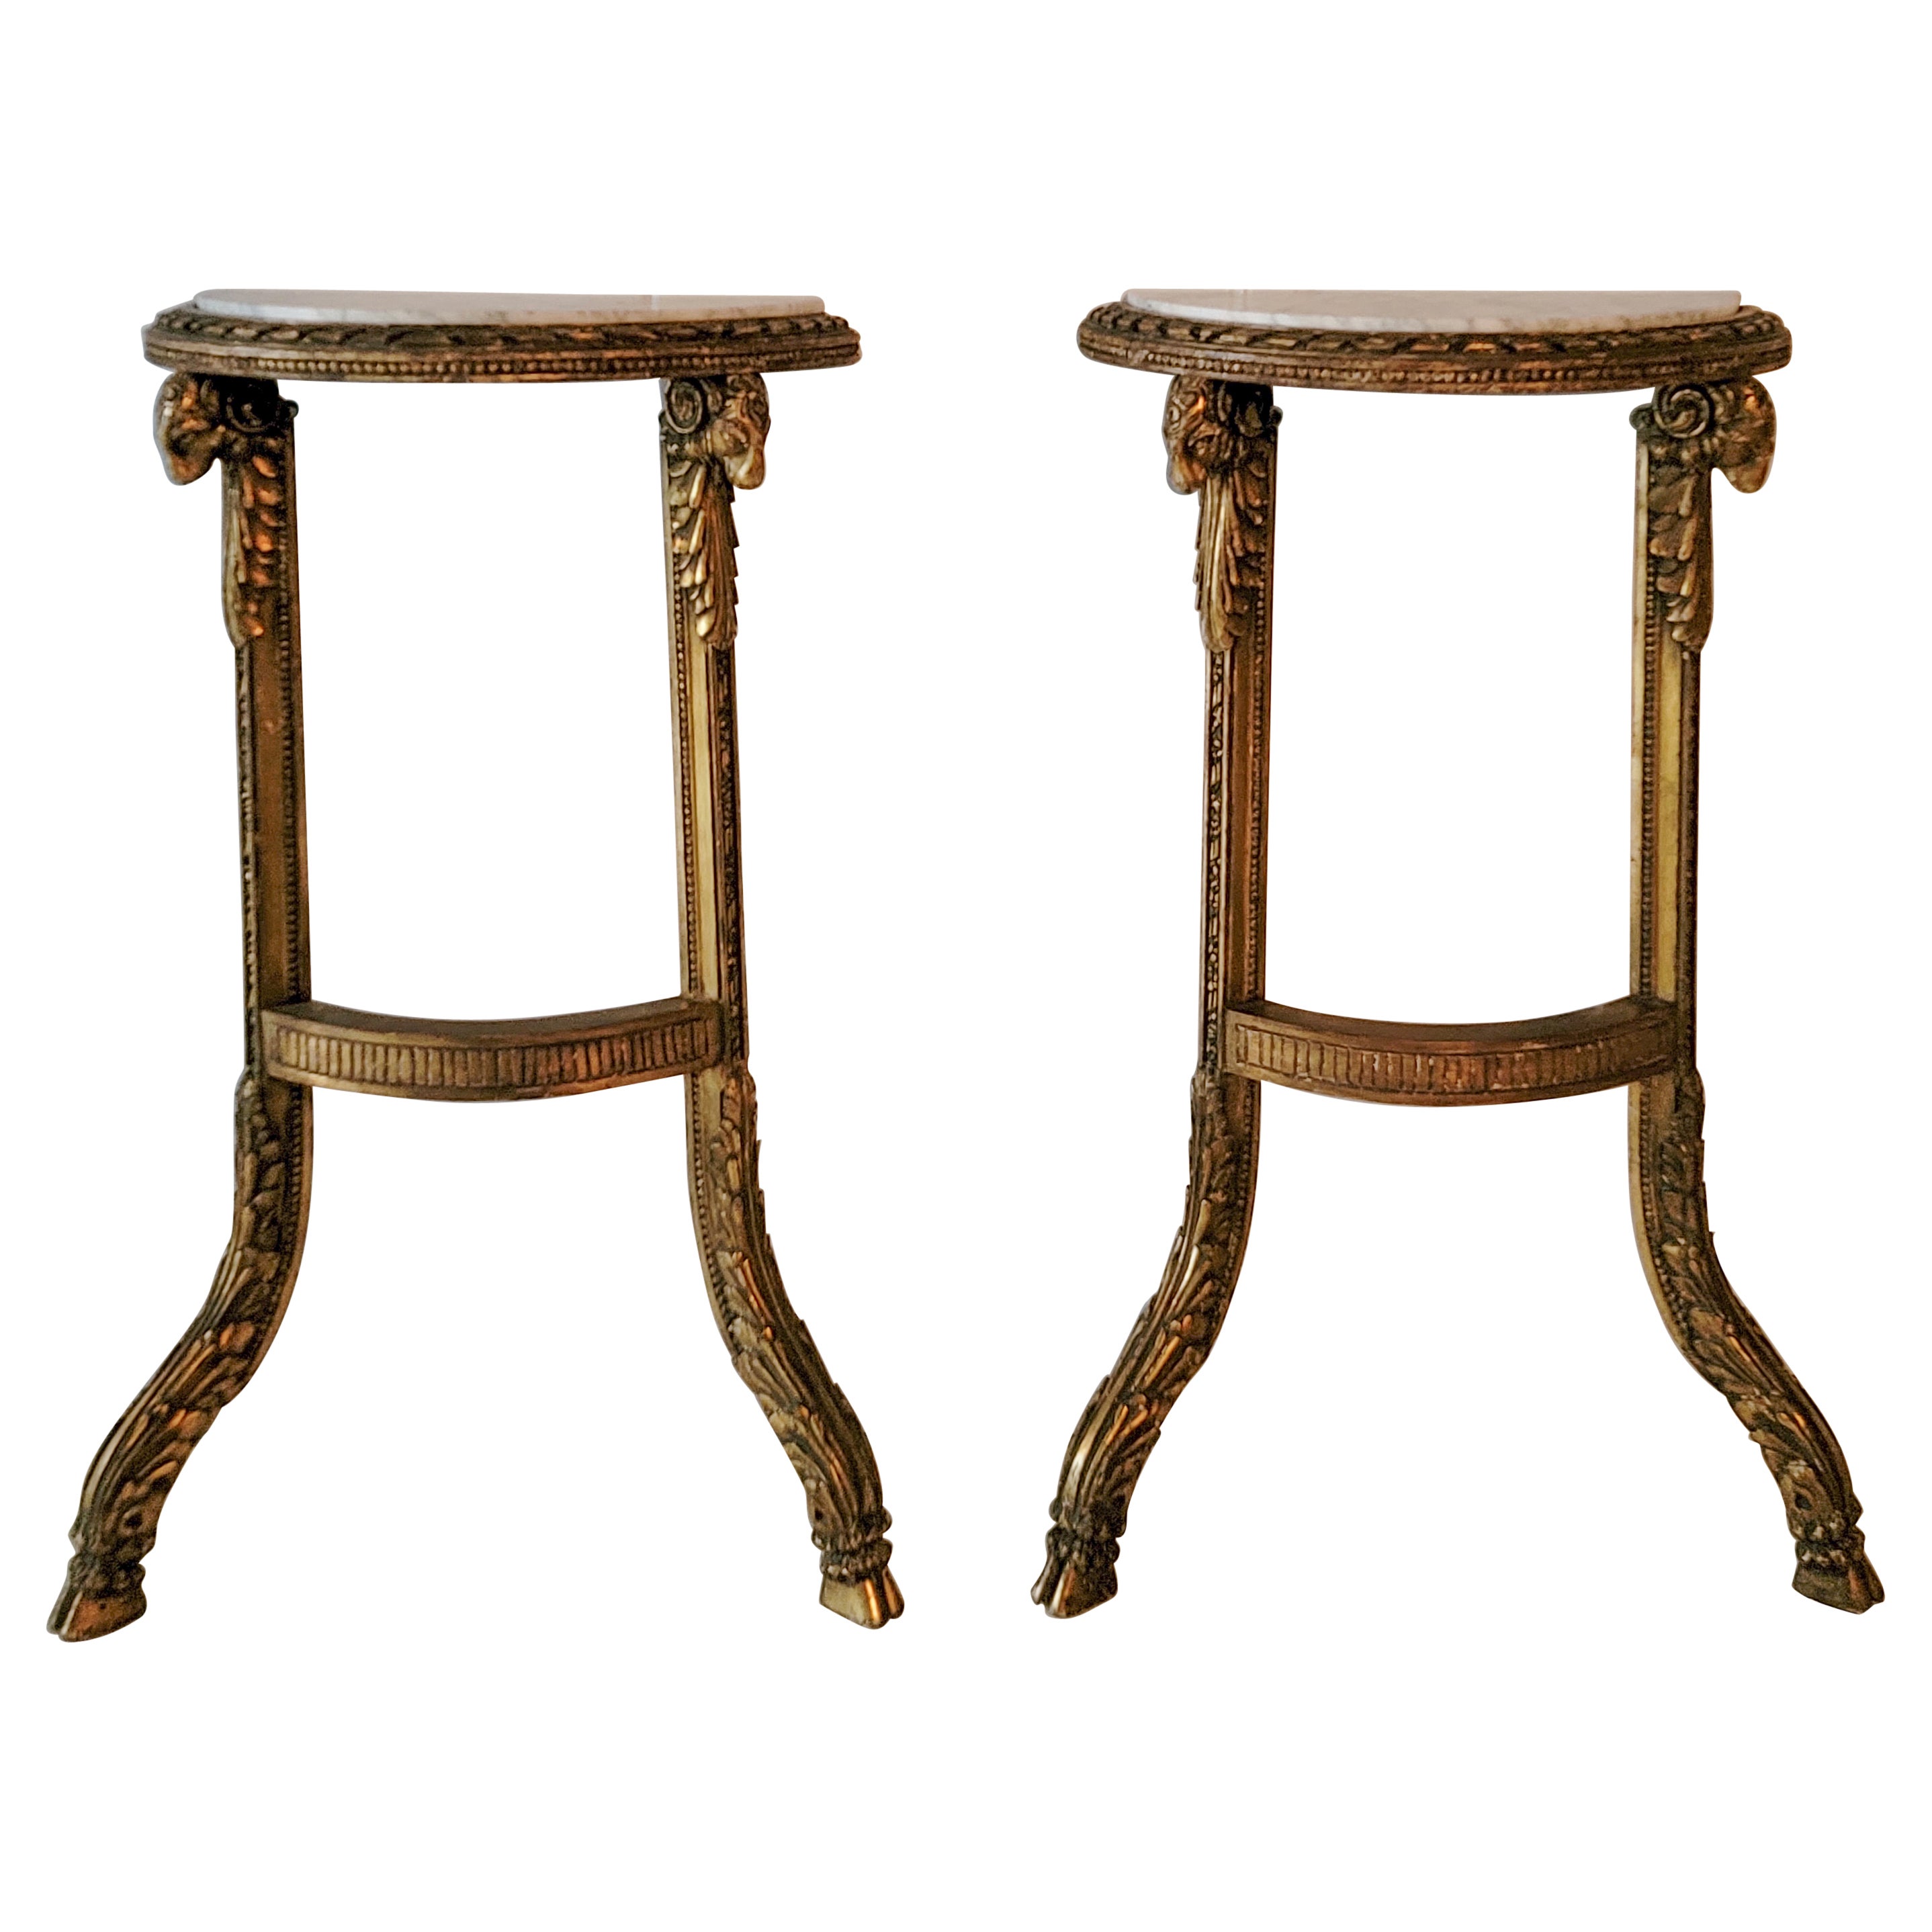 19th-C. French Neo-Classical Style Carved Ram Marble Top Console Tables, Pair